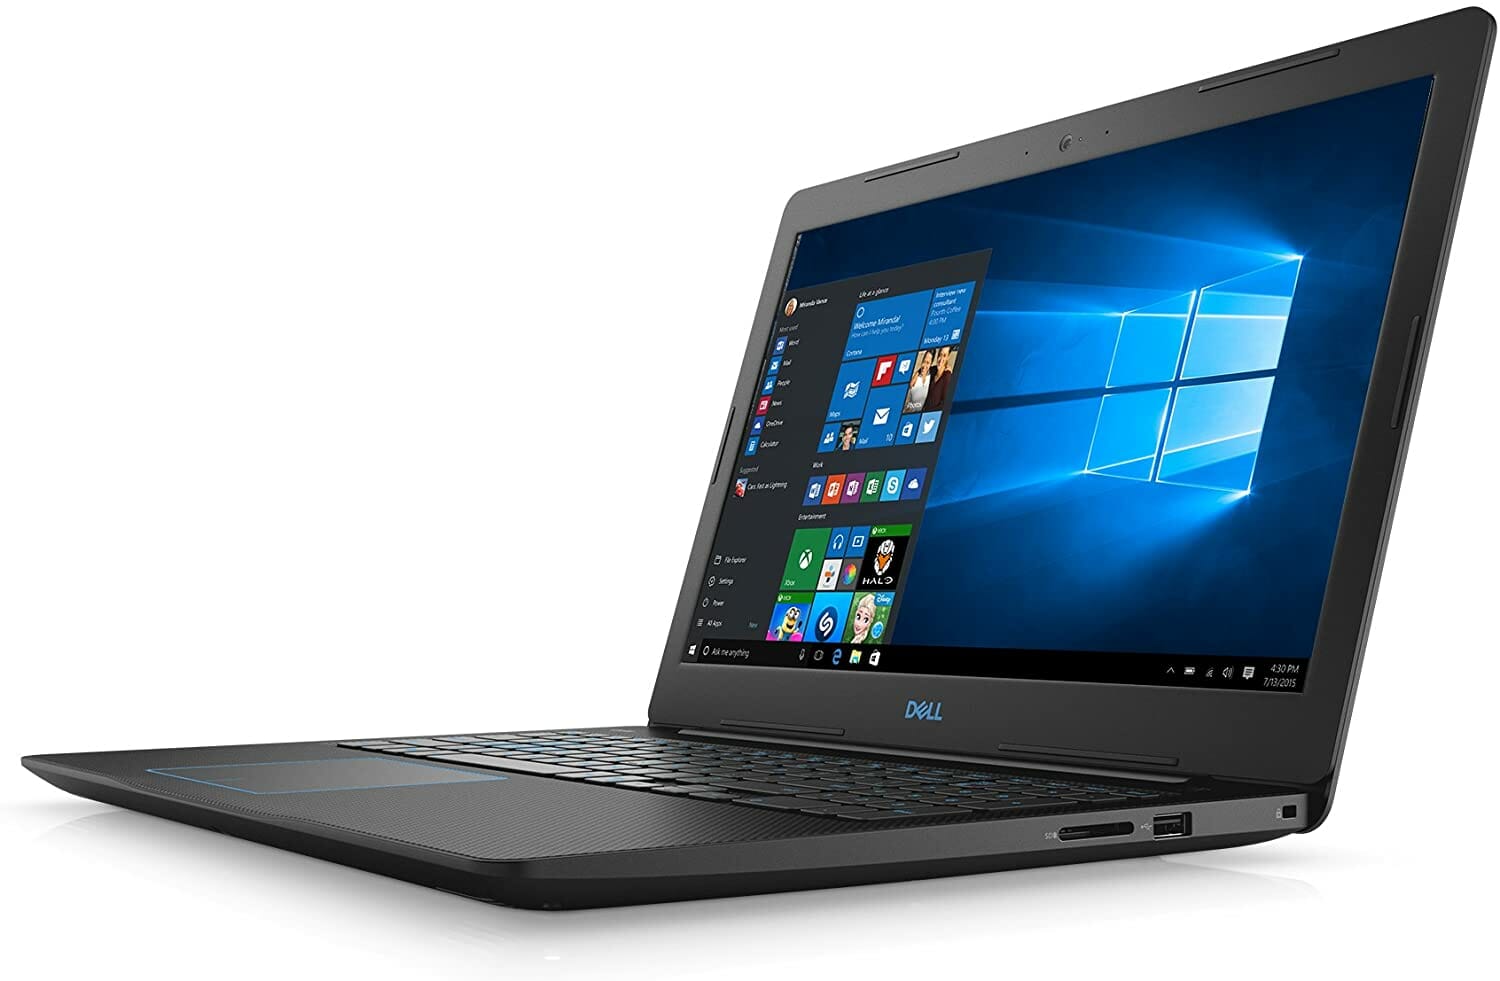  Dell G3 Gaming Laptop